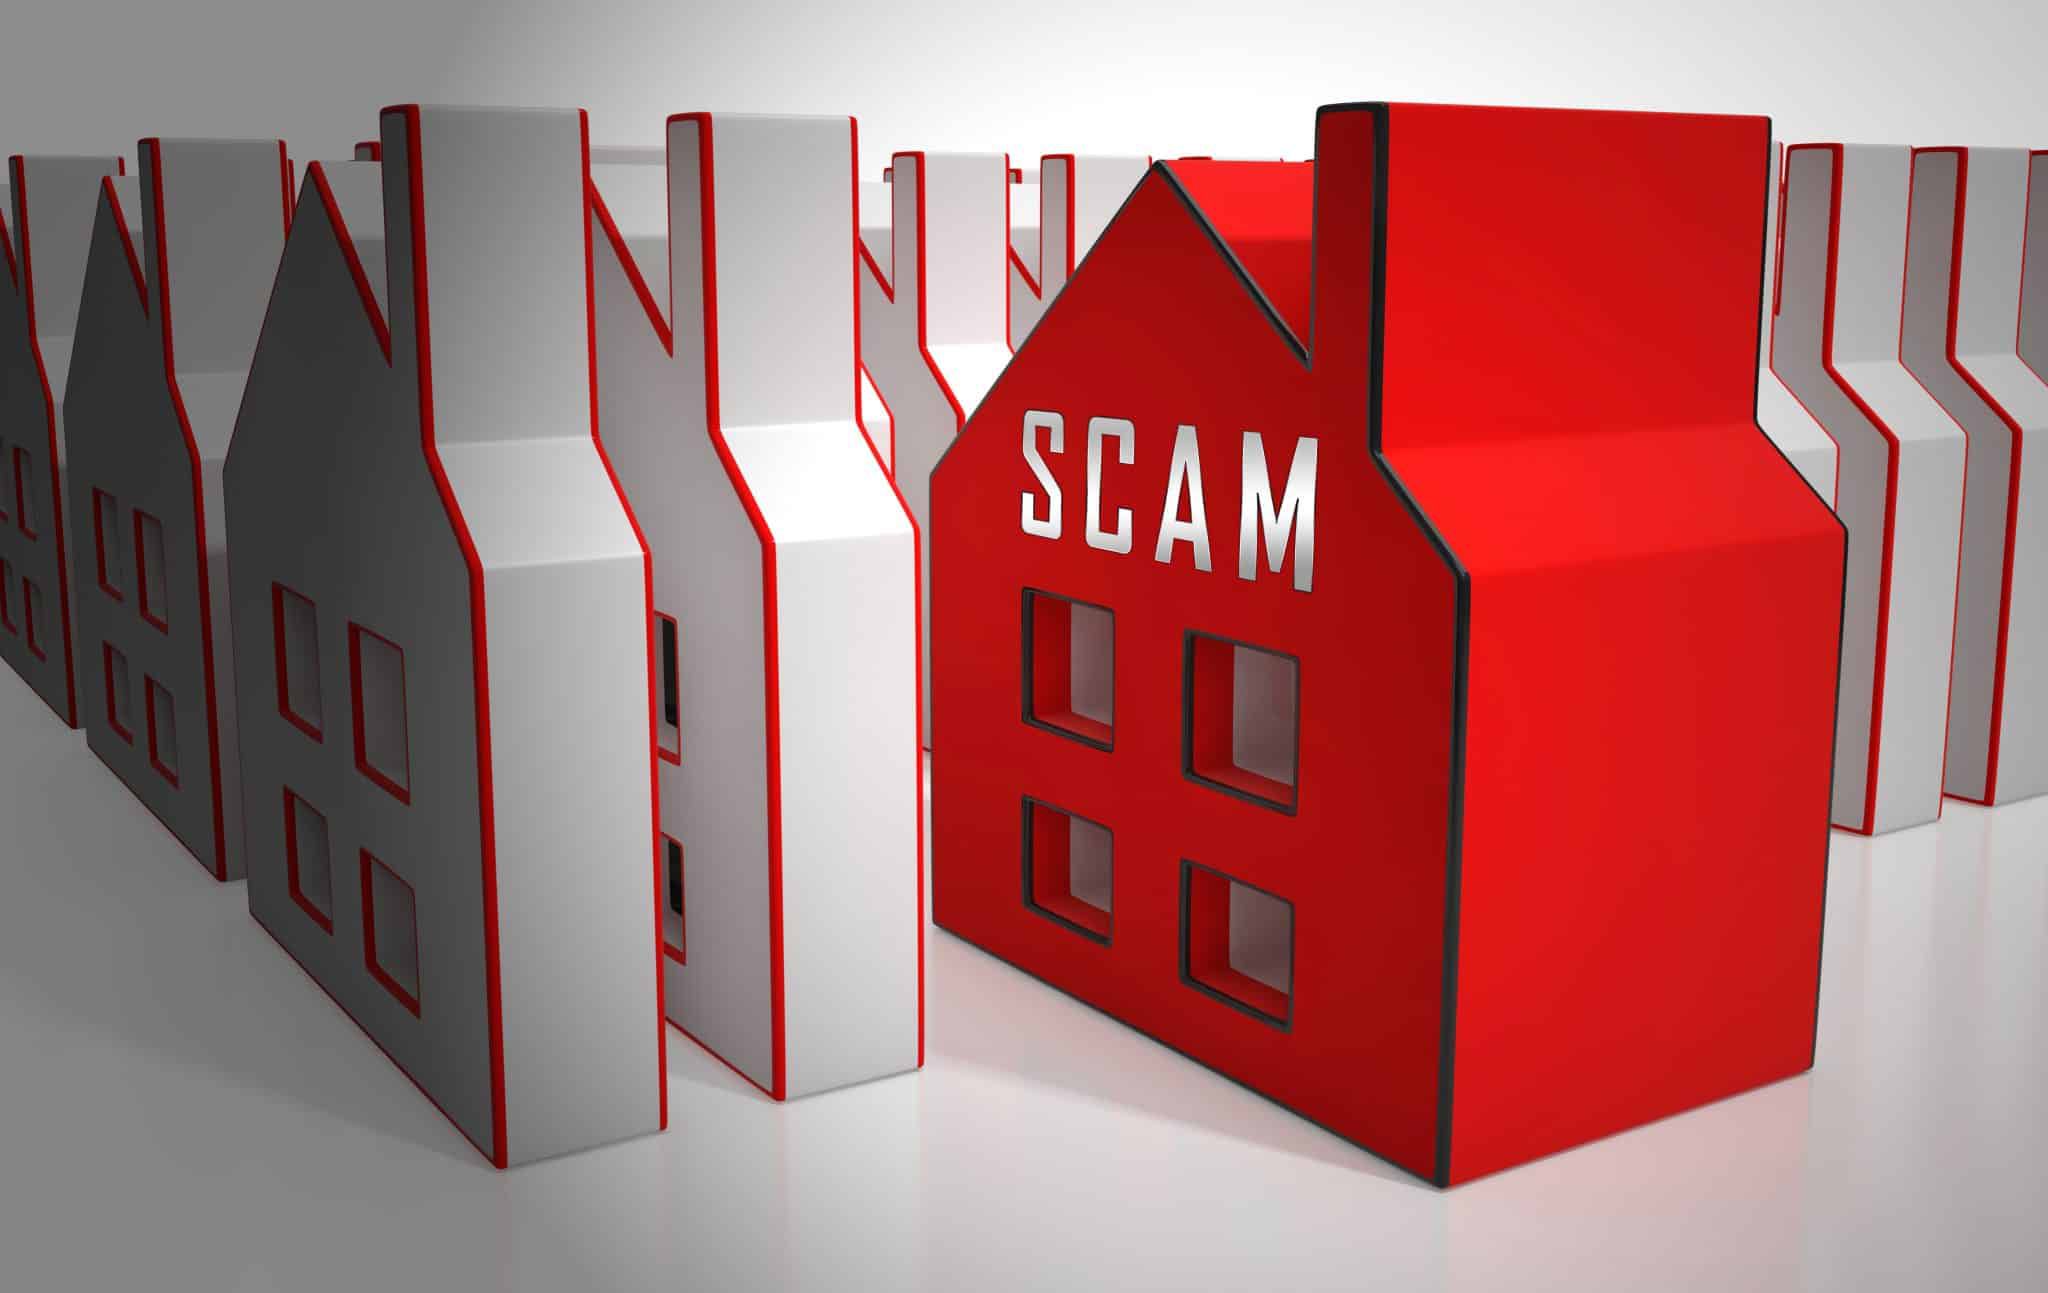 Property scam warning for Montgomery County